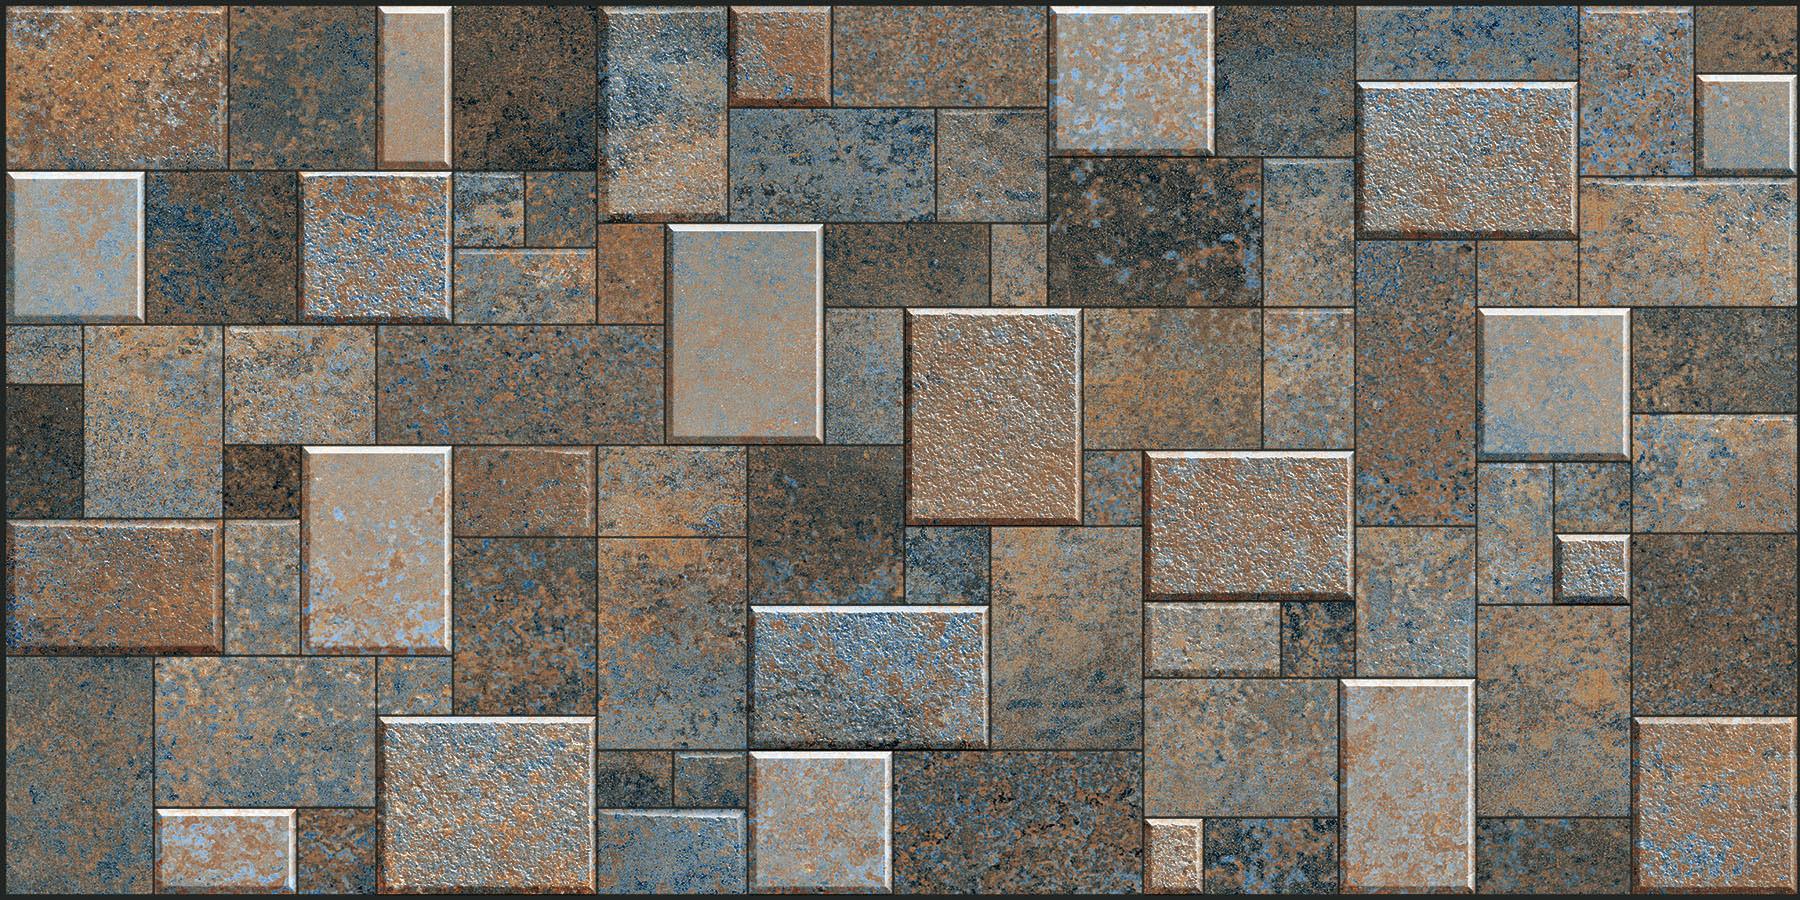 Elevation Tiles for Bathroom Tiles, Living Room Tiles, Elevation Tiles, Accent Tiles, Hospital Tiles, Bar/Restaurant, Commercial/Office, Outdoor Area, School & Collages